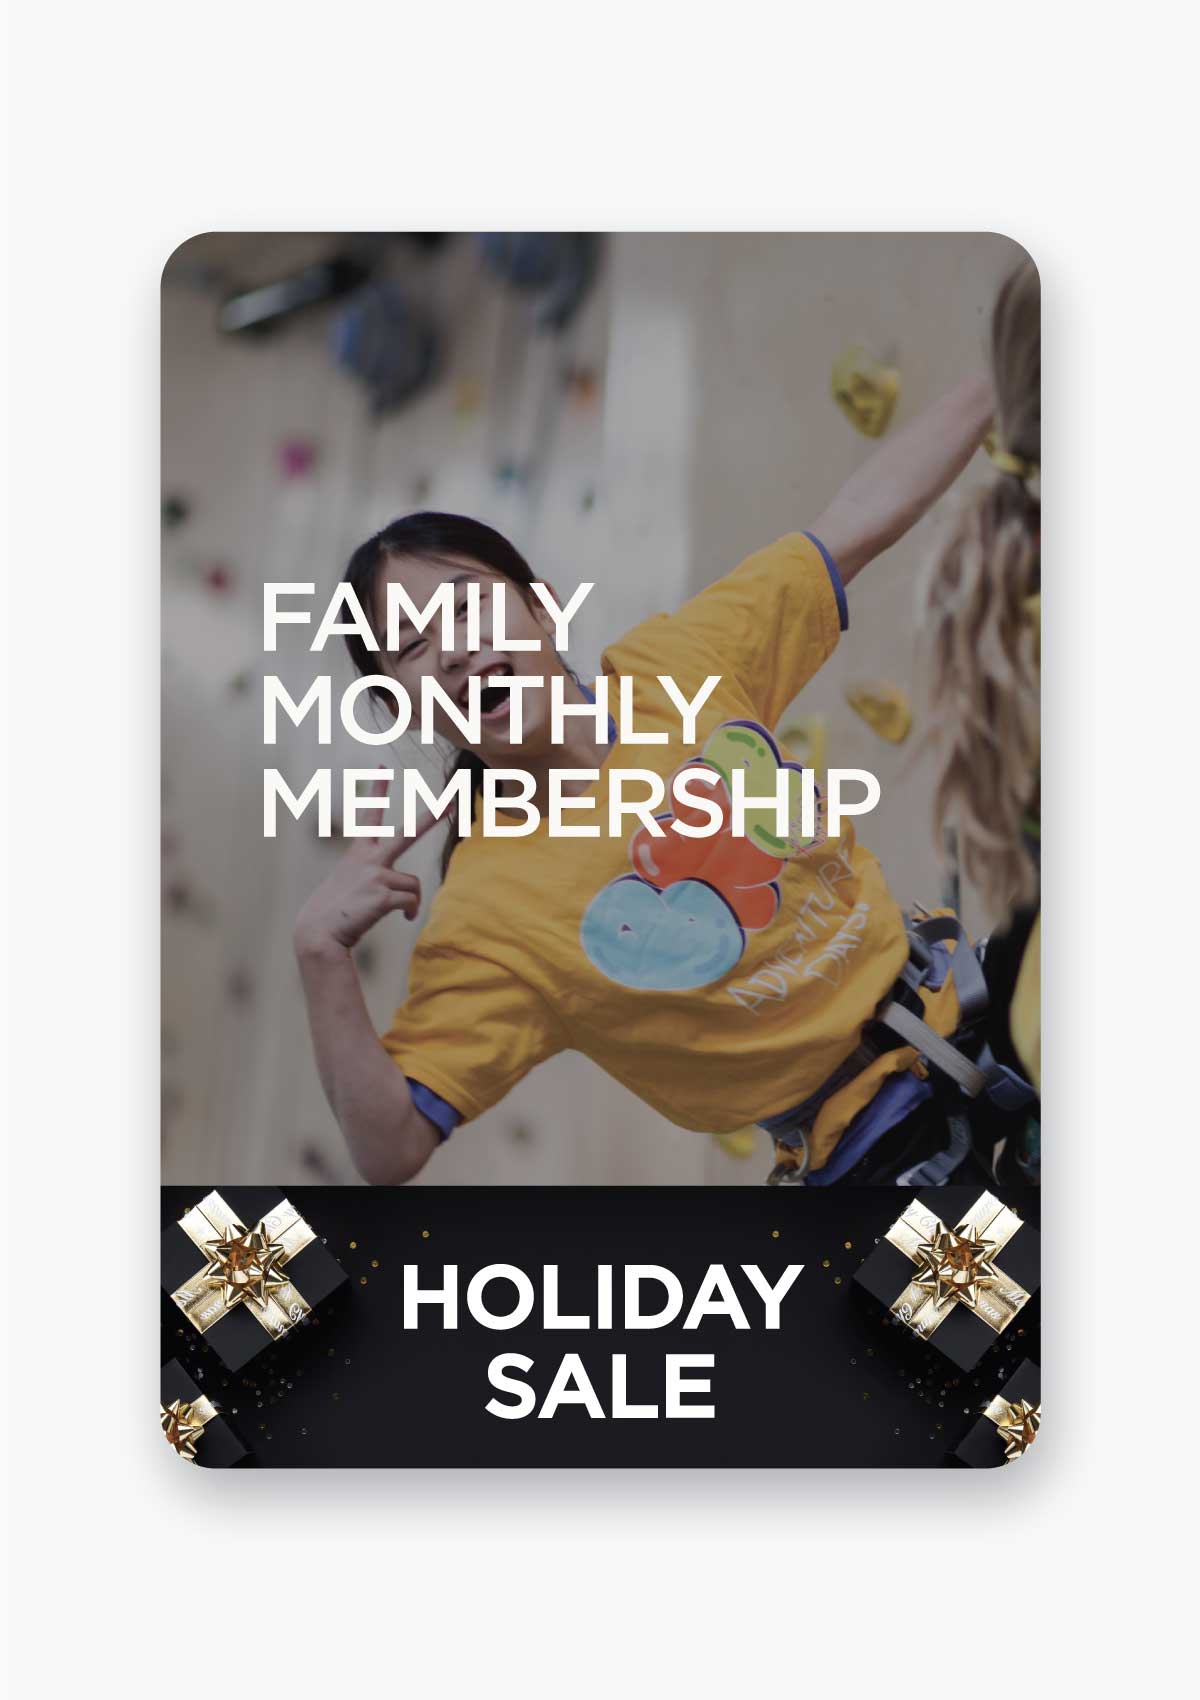 HOLIDAY FAMILY MONTH MEMBERSHIP